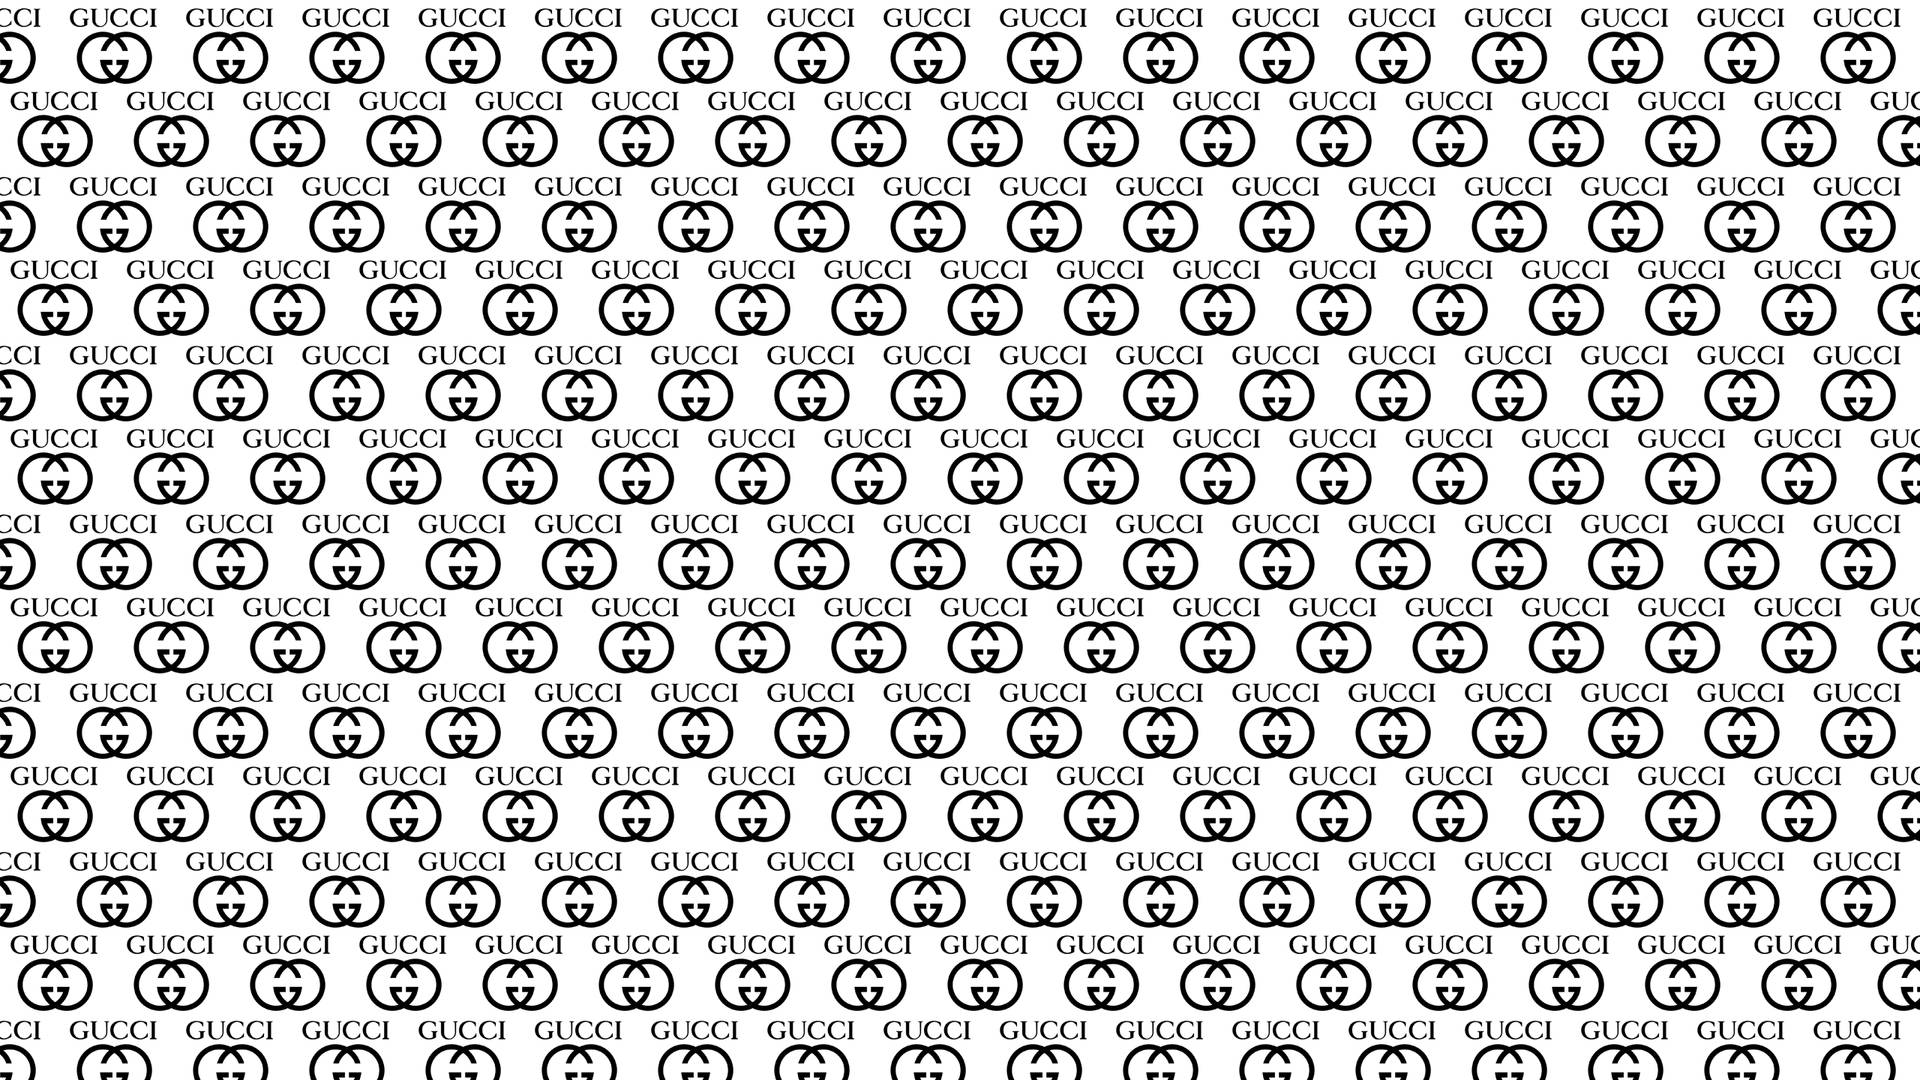 100+] Gucci Pattern Backgrounds